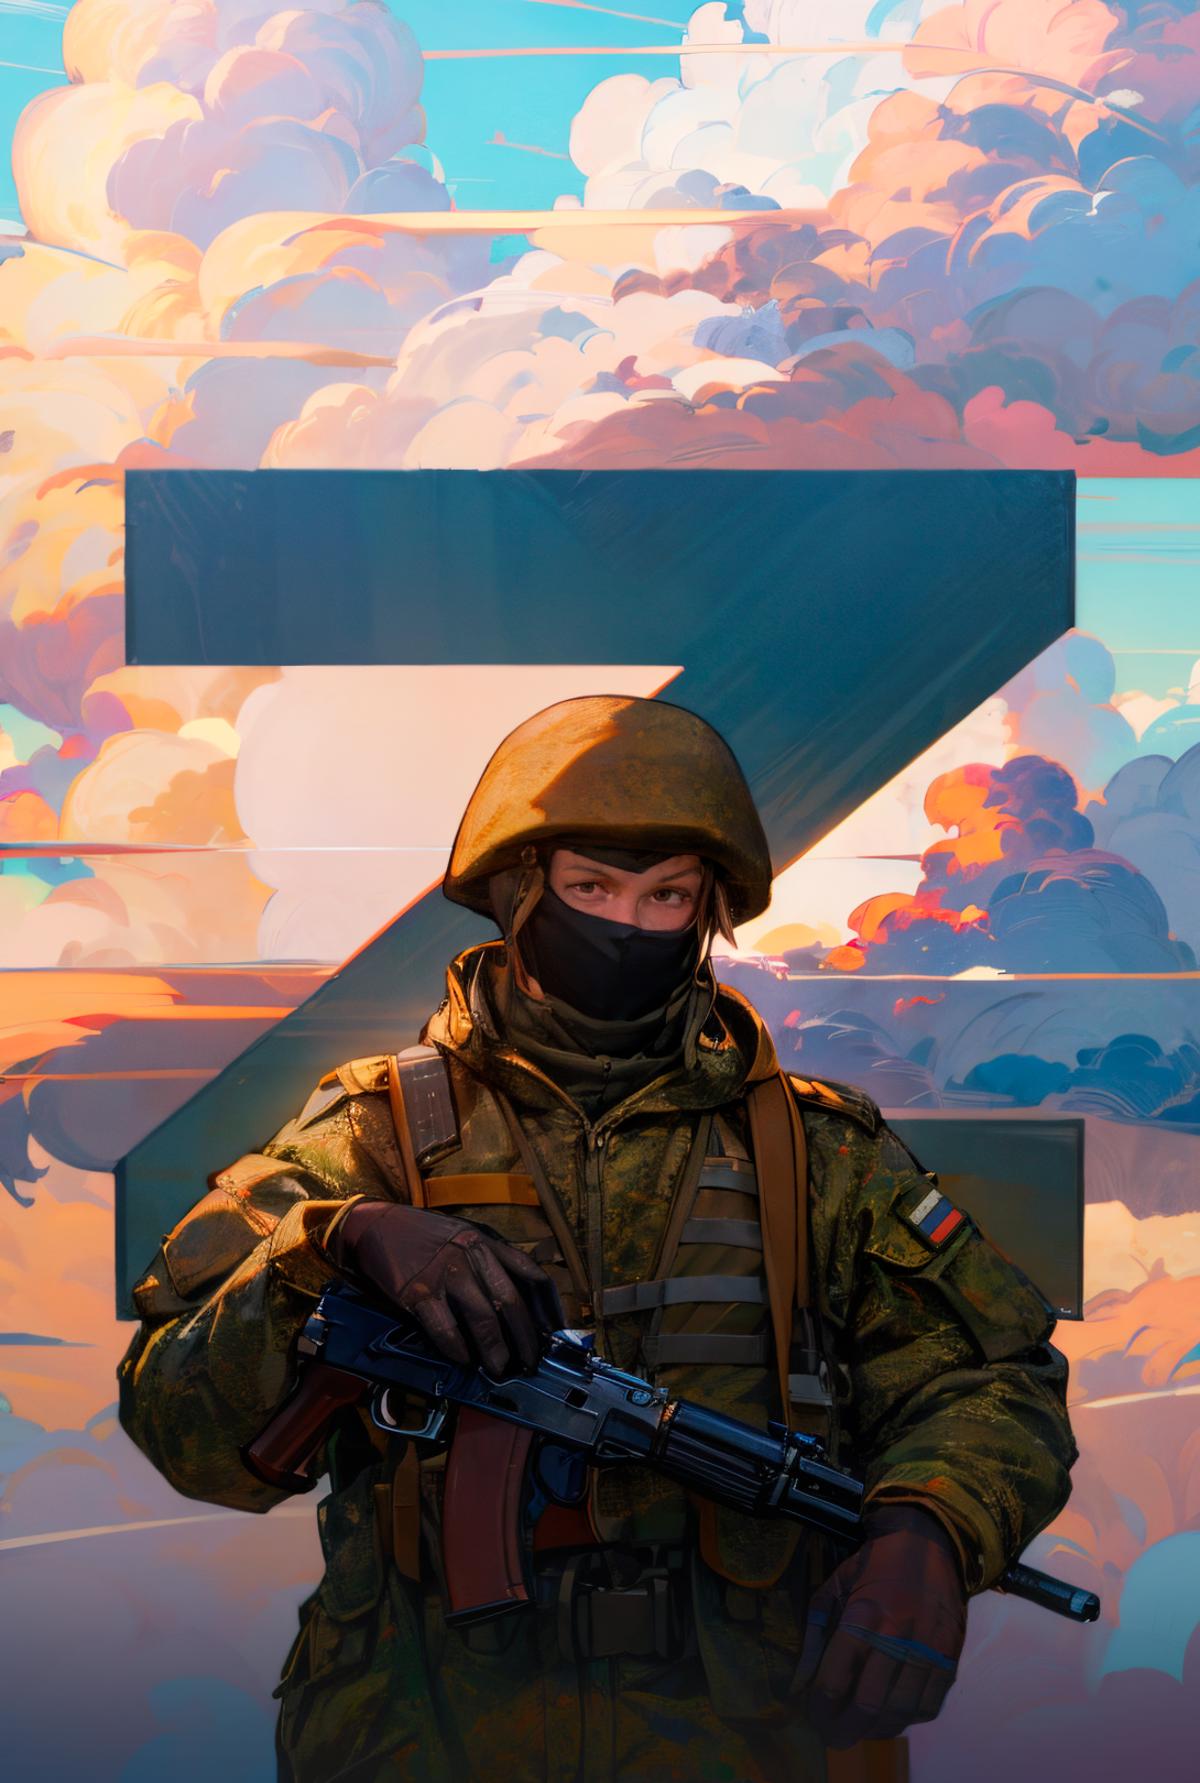 A soldier with a gun is standing in front of the letter Z.